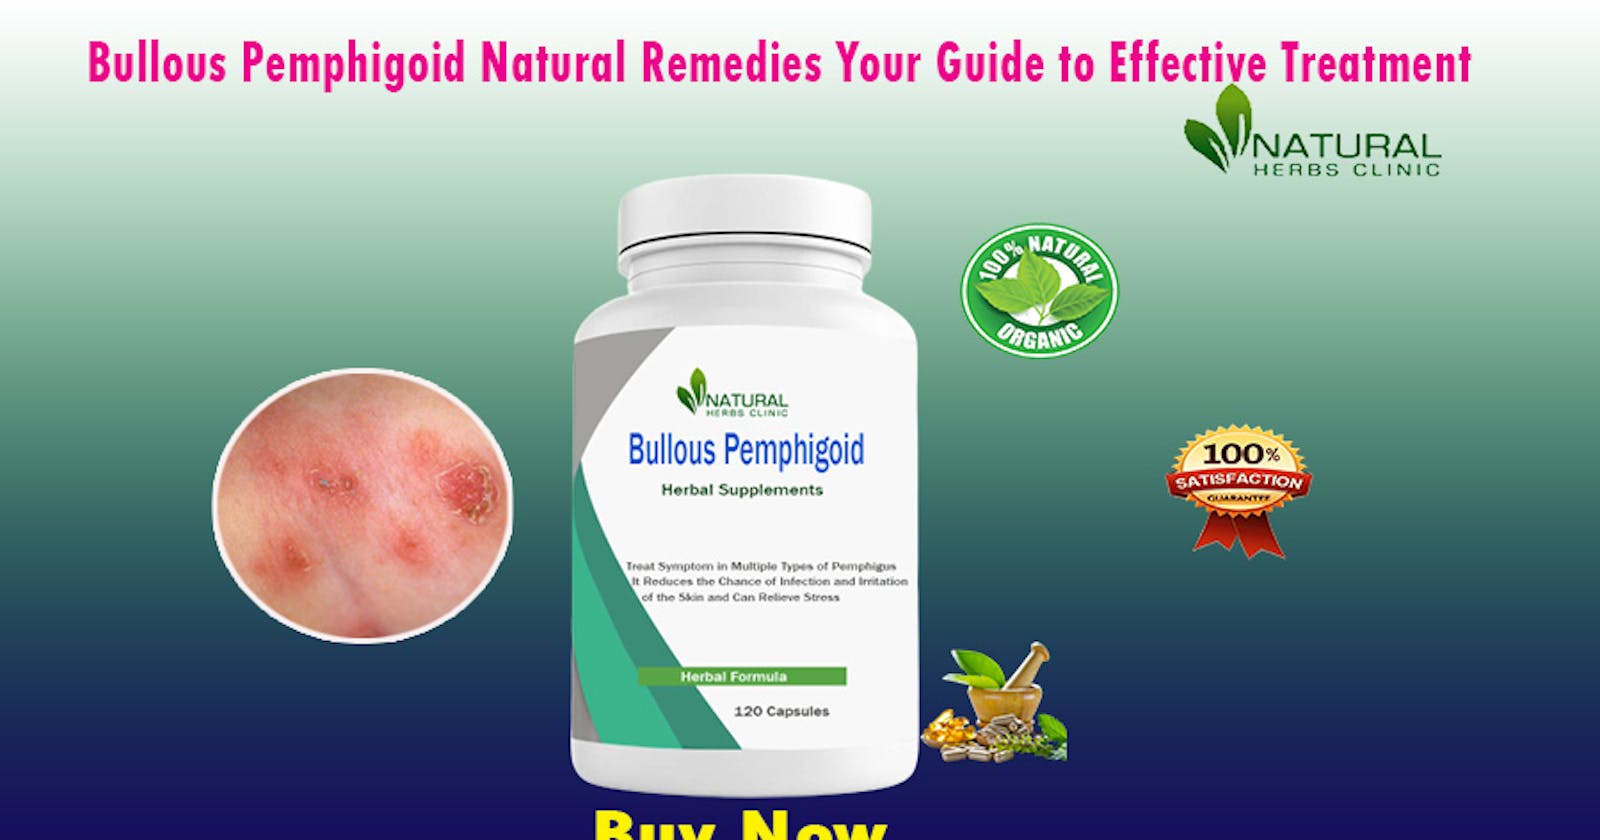 Transform Your Life with Natural Home Treatment for Bullous Pemphigoid